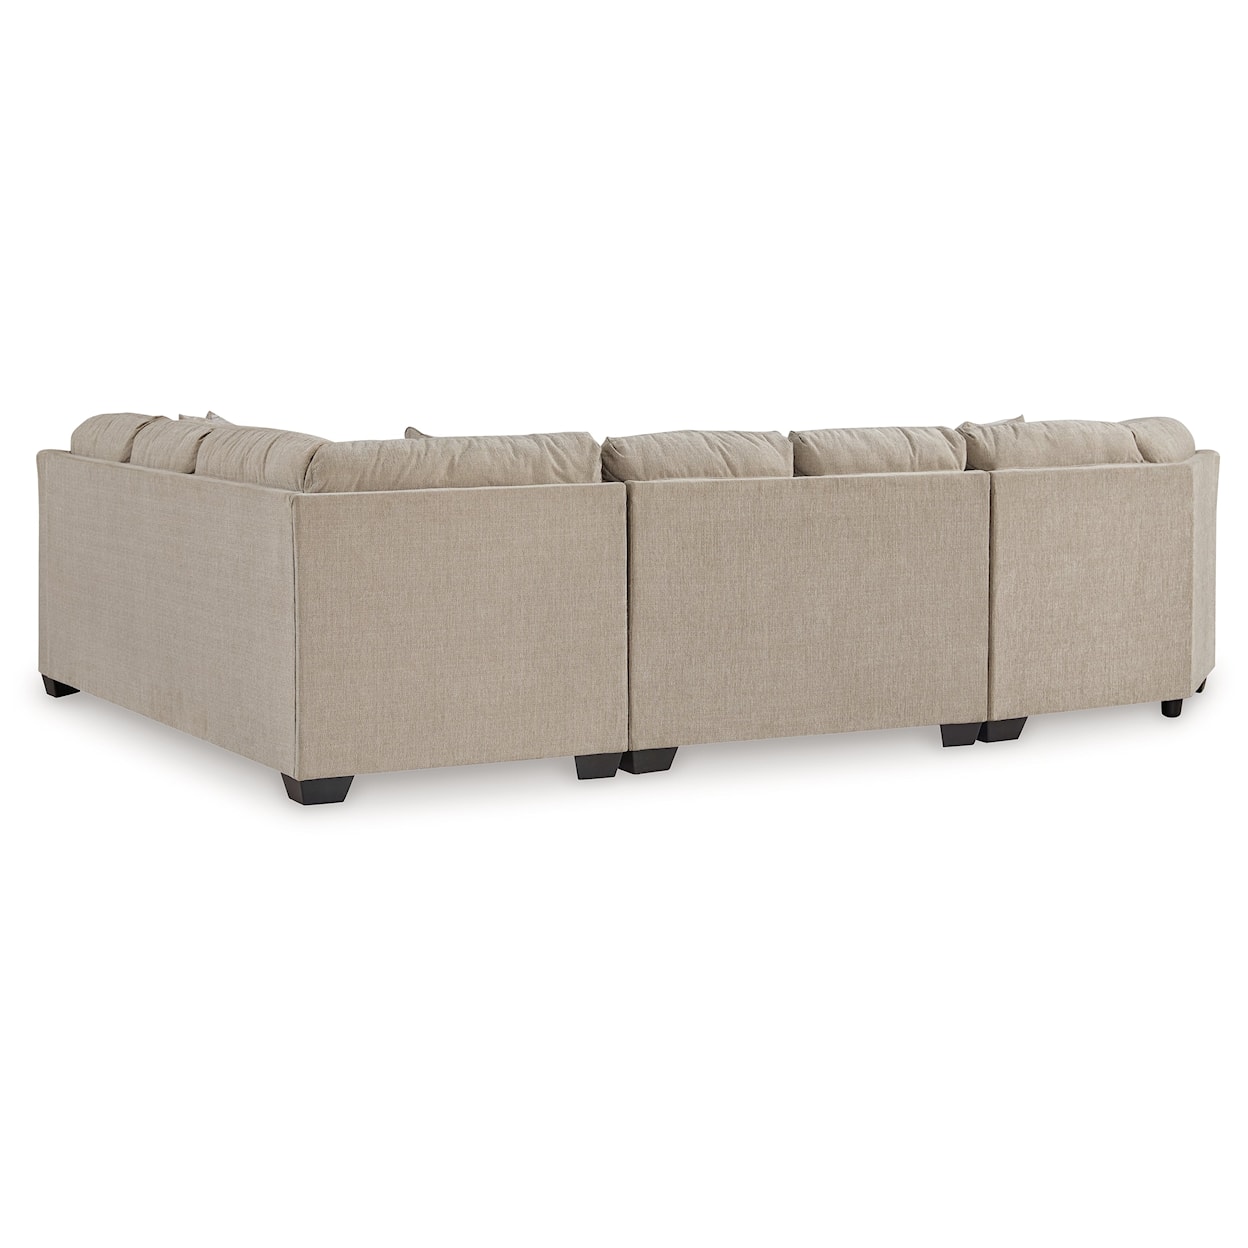 Signature Design by Ashley Brogan Bay 3-Piece Sectional With Cuddler